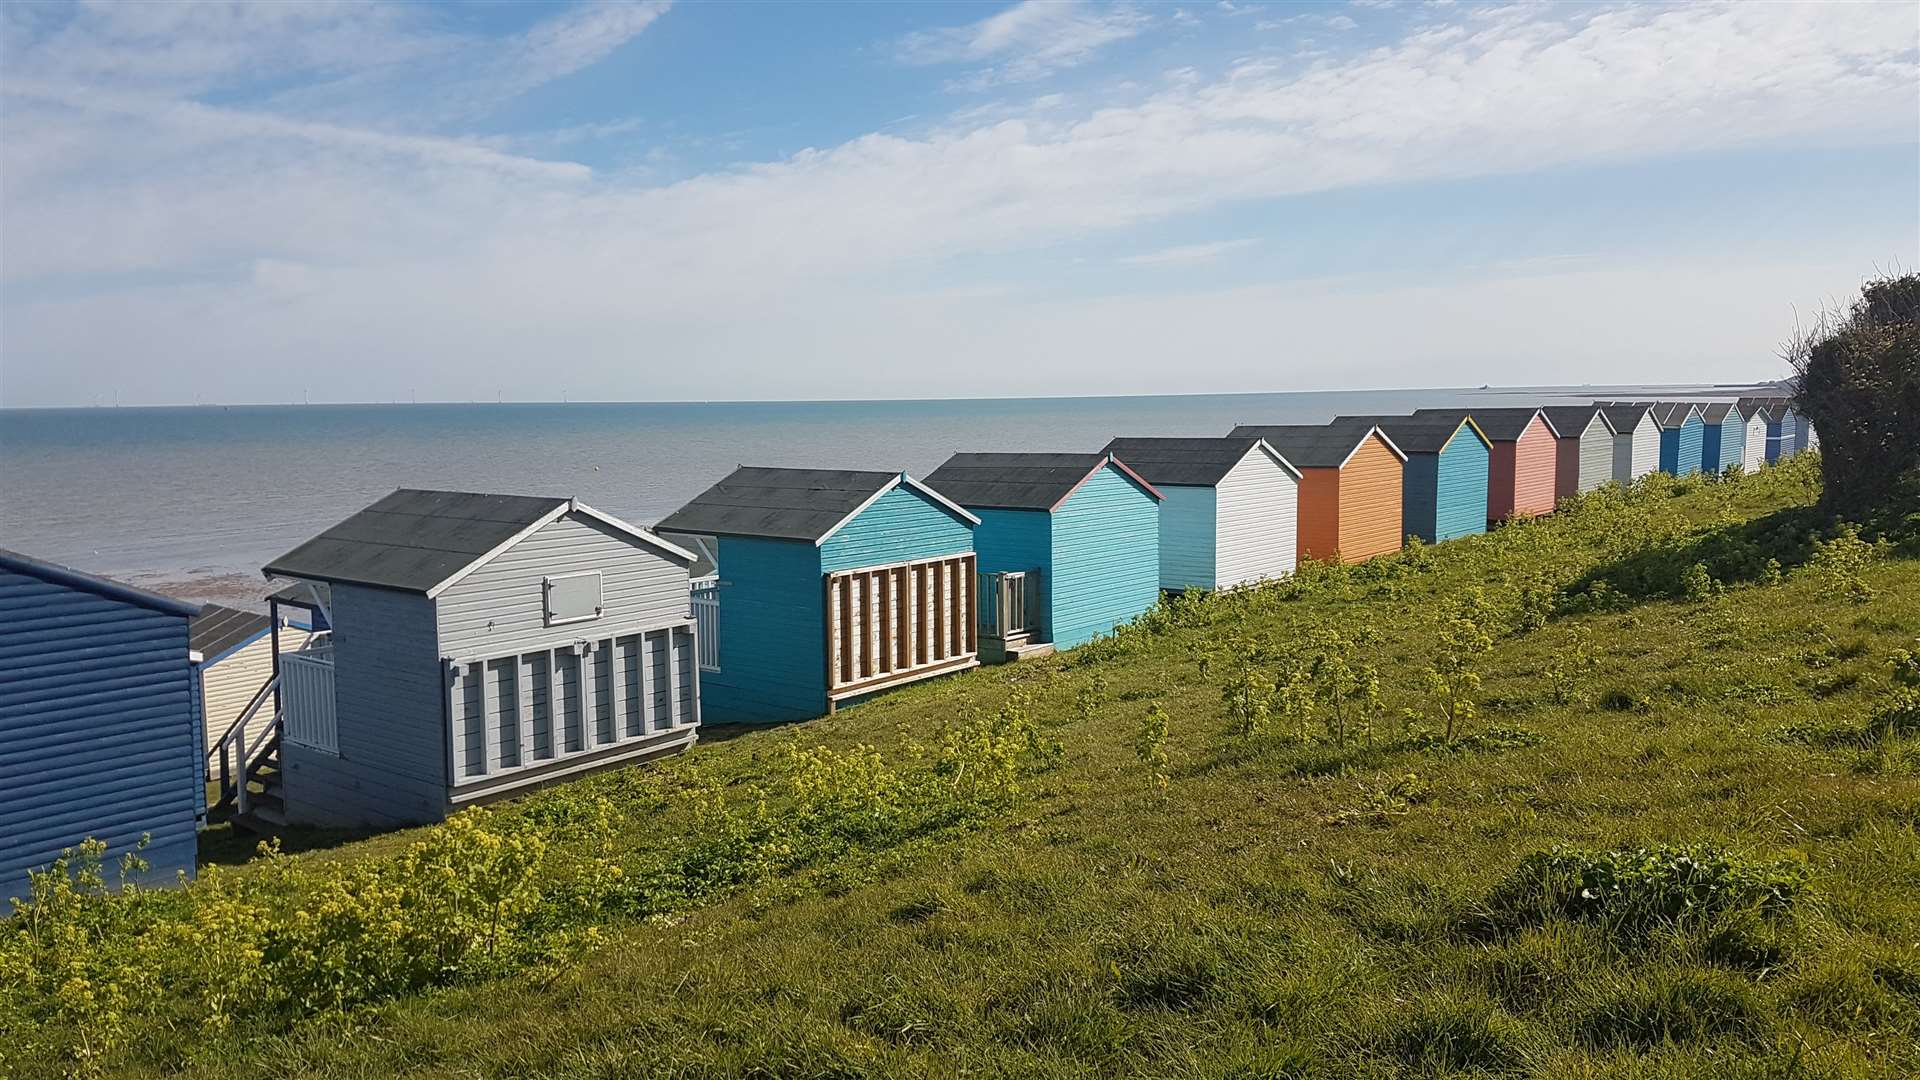 The council wants to build 20 of the beach huts in Tankerton